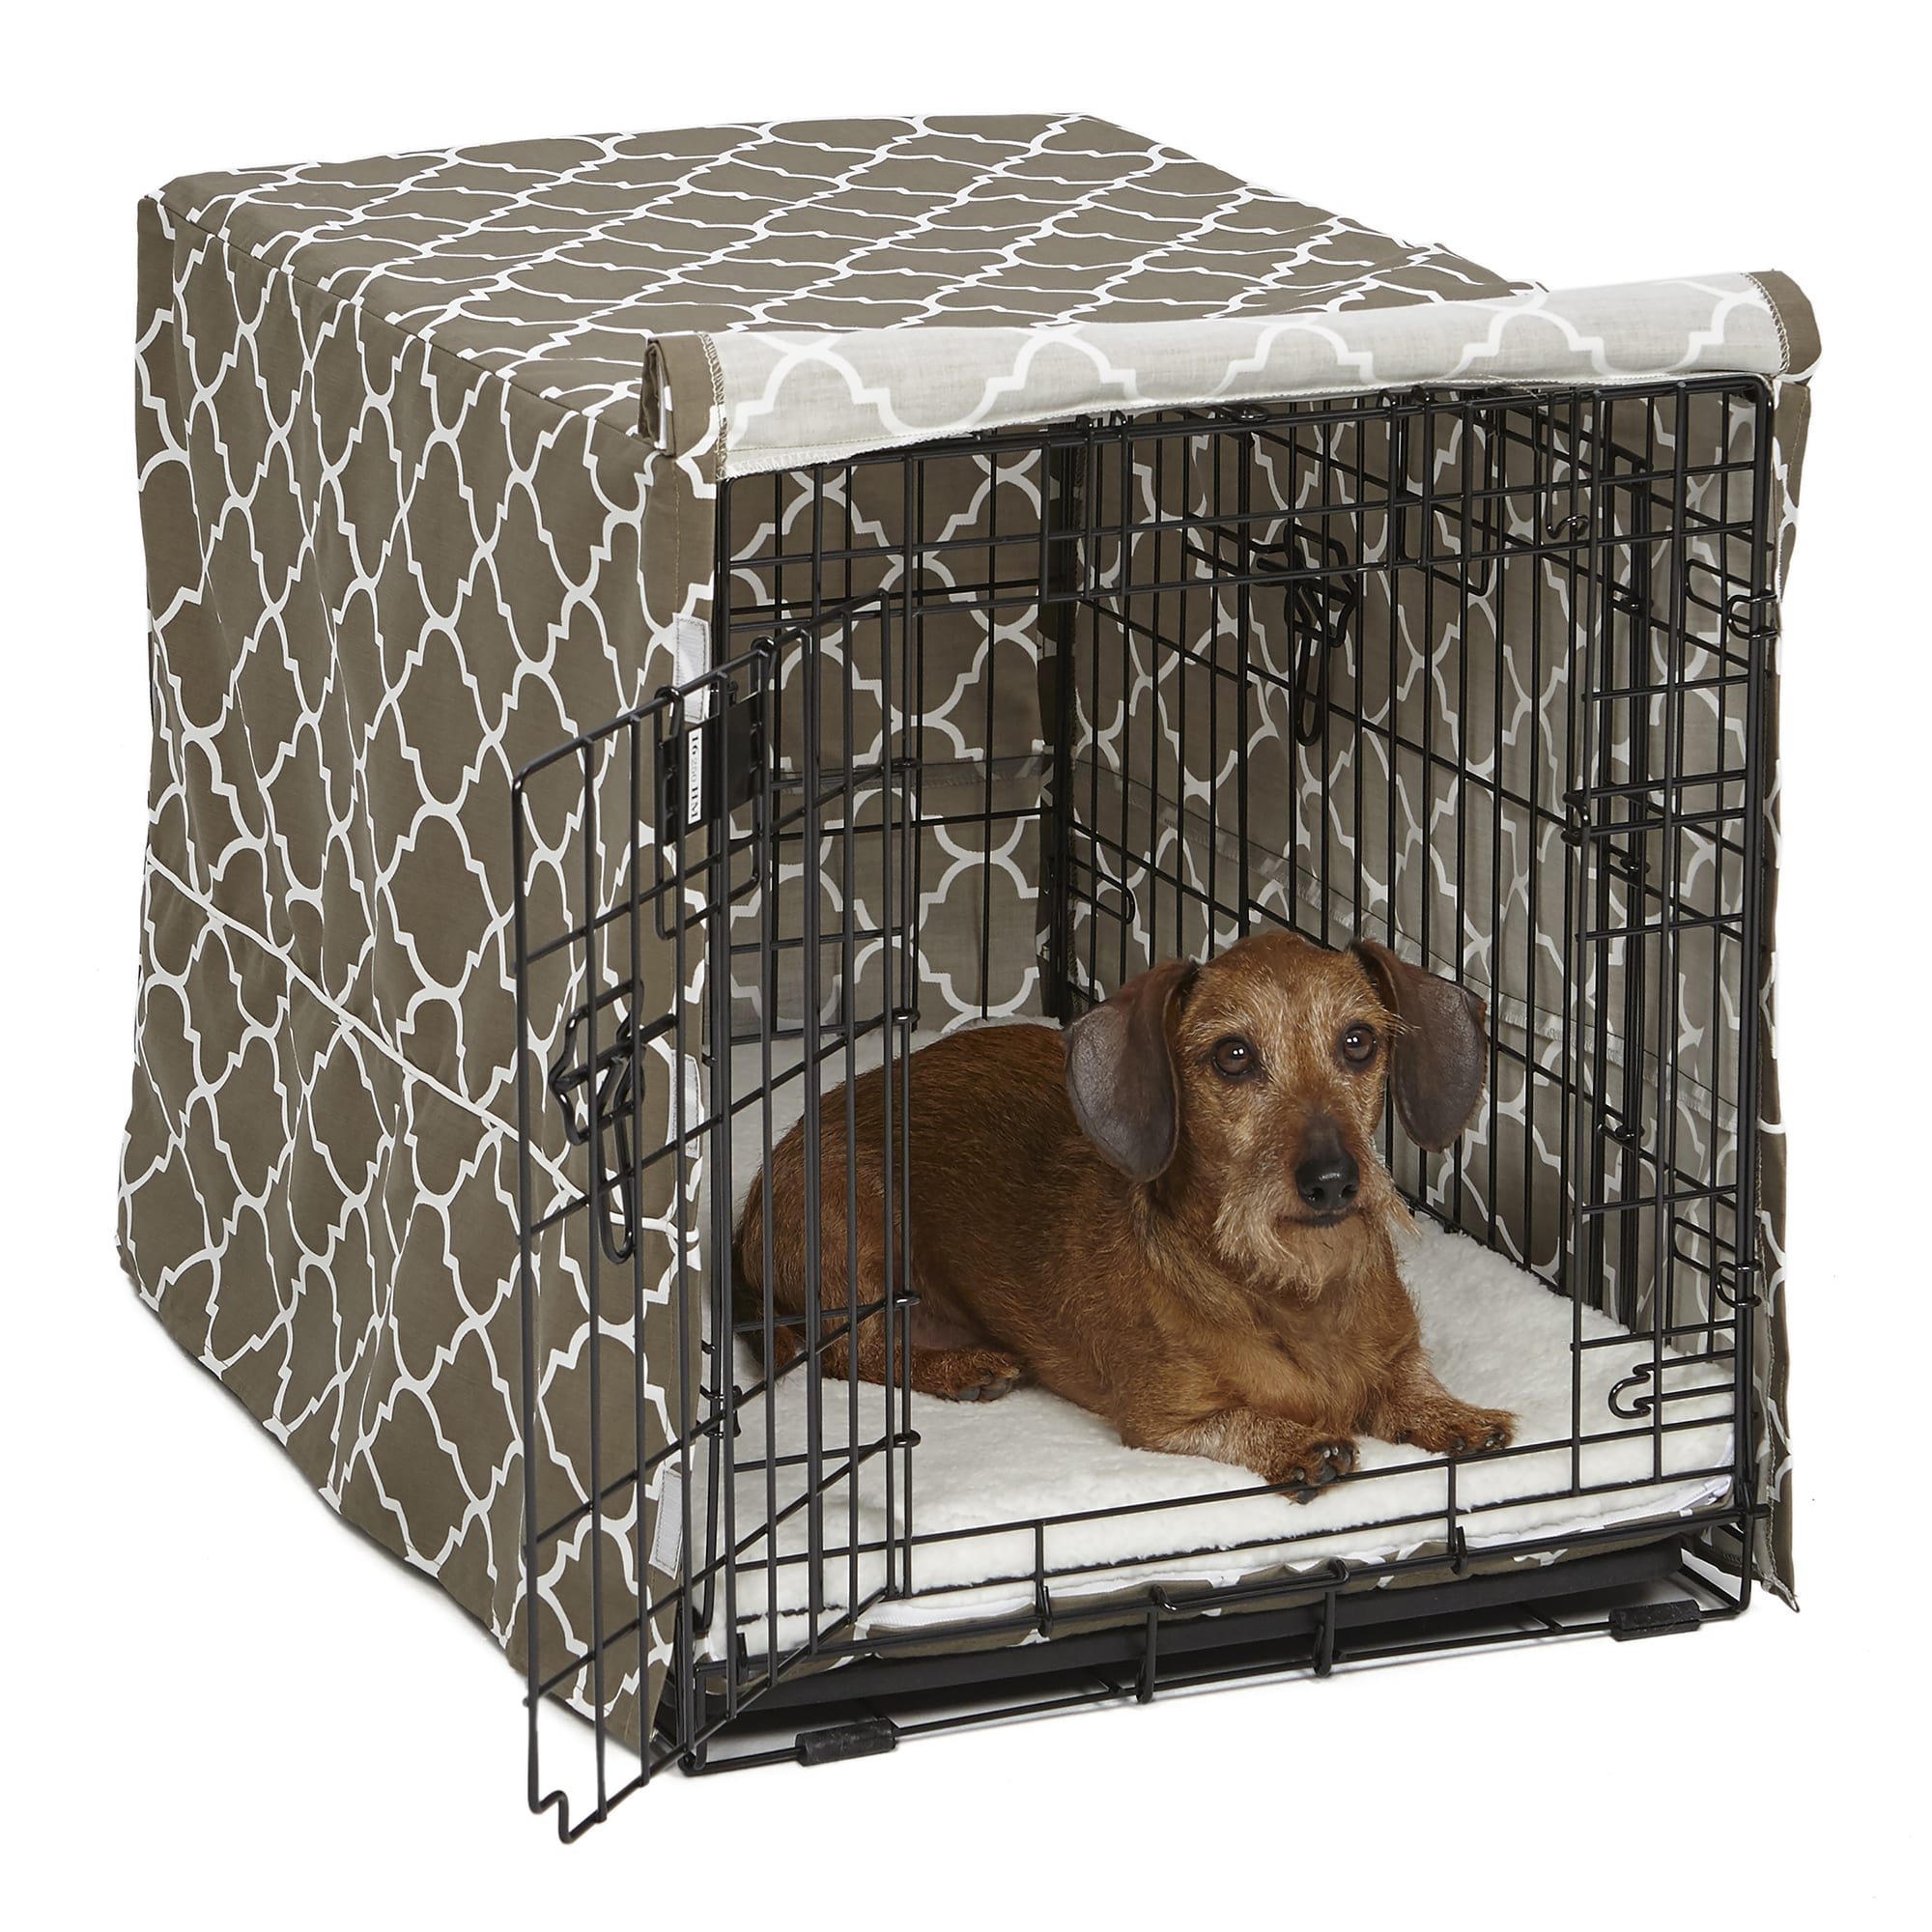 UPC 027773022718 product image for Midwest Quiet Time Defender Brown Crate Cover for Dogs, 30